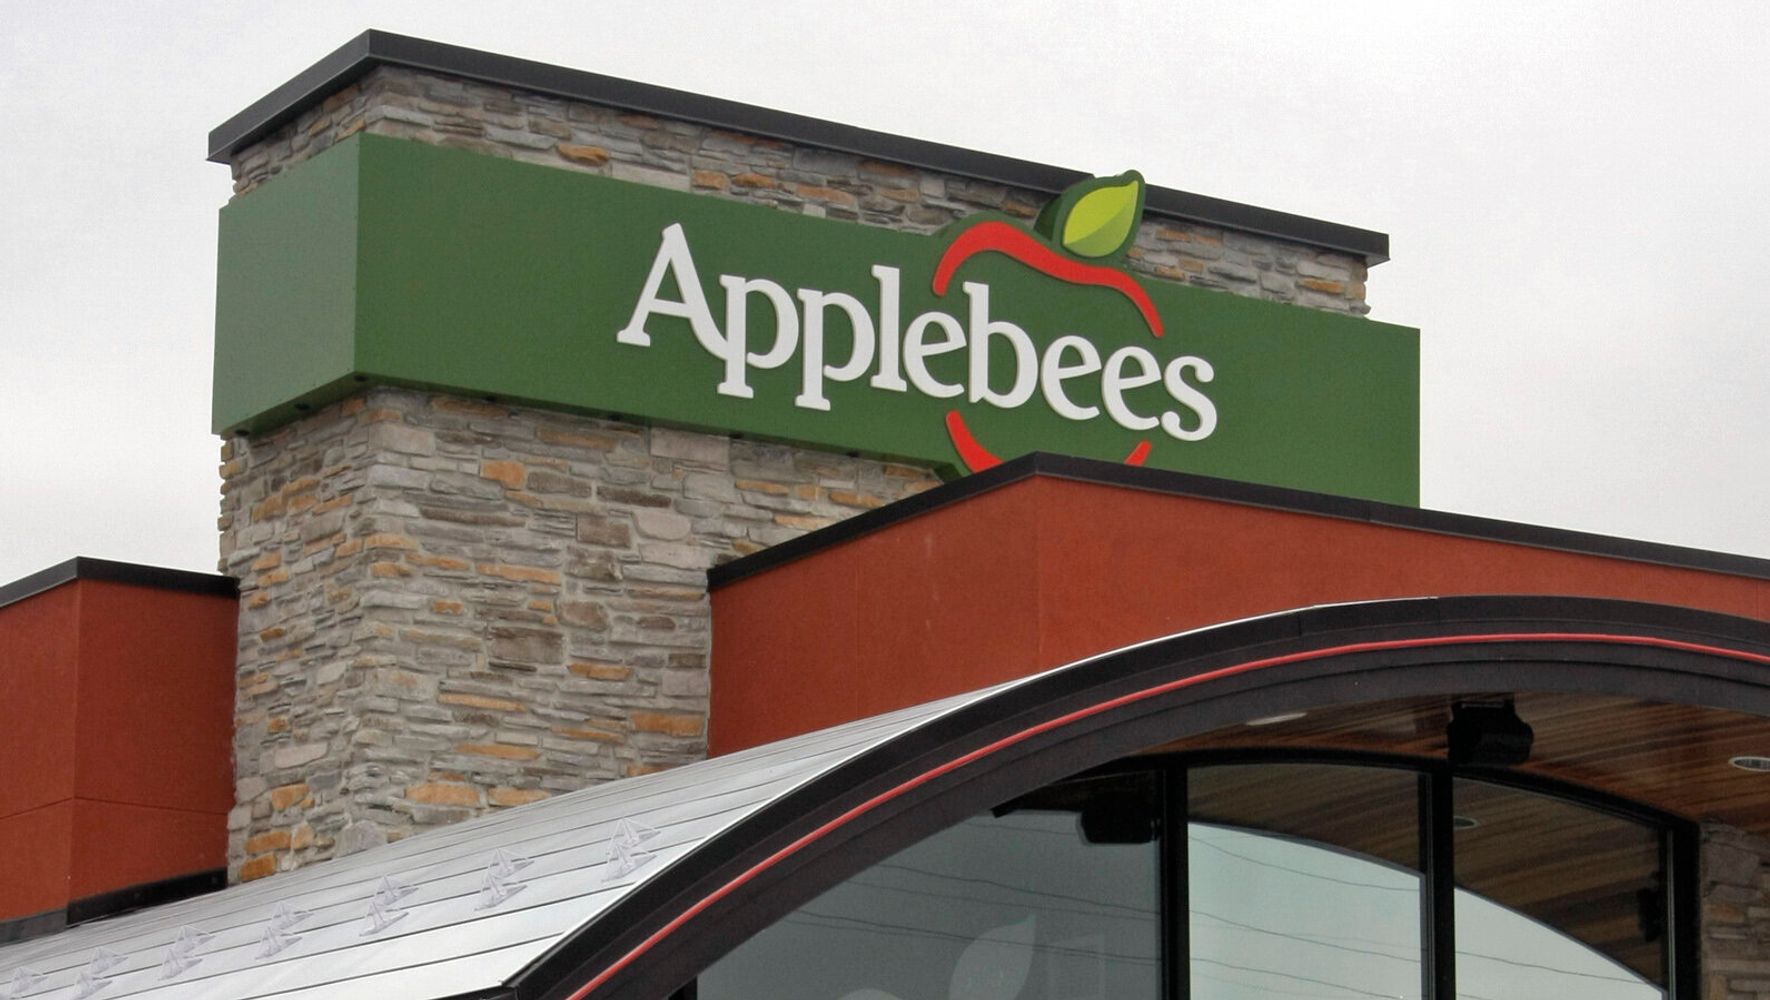 Applebee's Franchisee Fires Employee Who Sent Email On Exploiting Workers